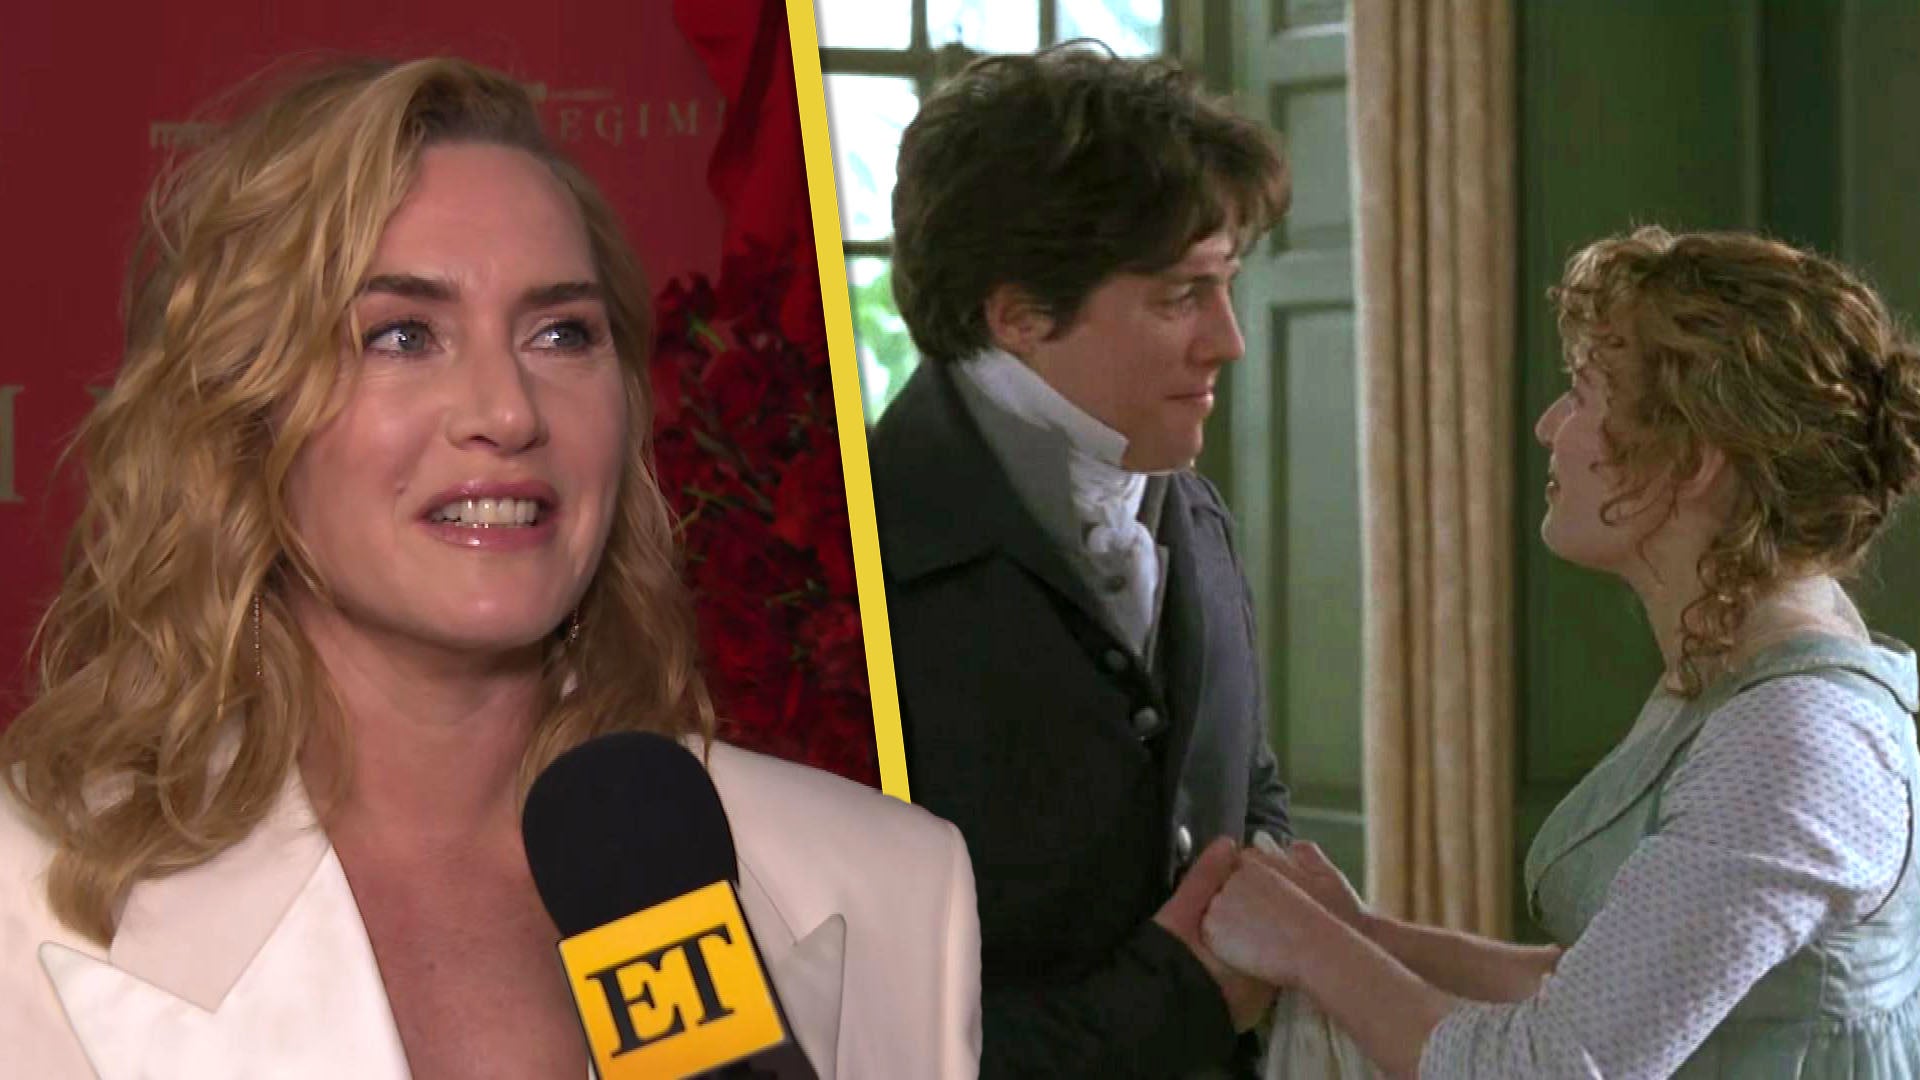 'The Regime': Kate Winslet on Reuniting With Hugh Grant 30 Years After 'Sense and Sensibility'